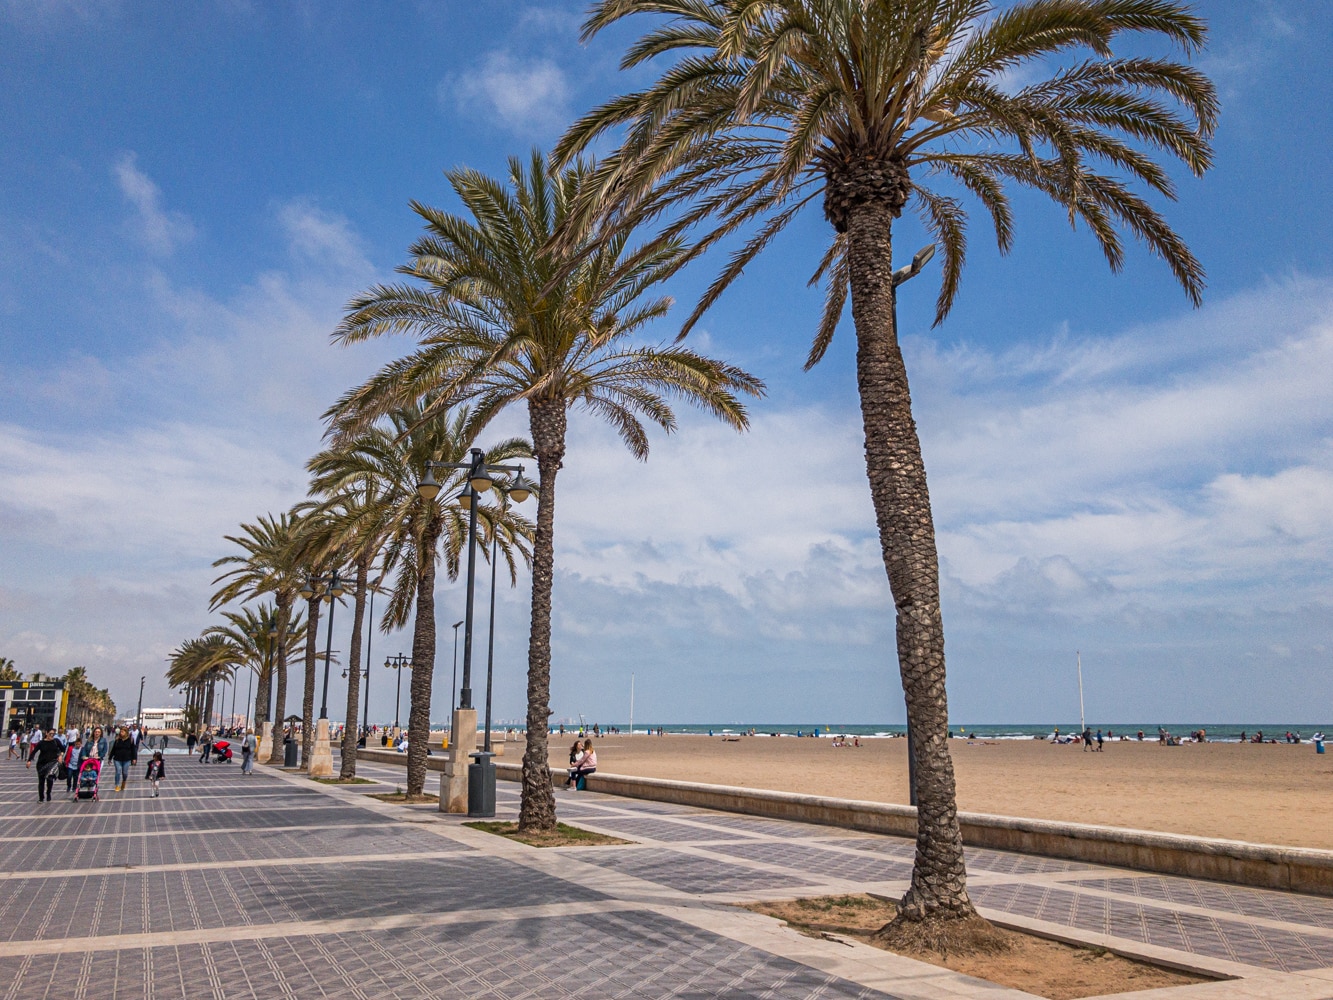 Top 10 things to do in Valencia - Wandering the World